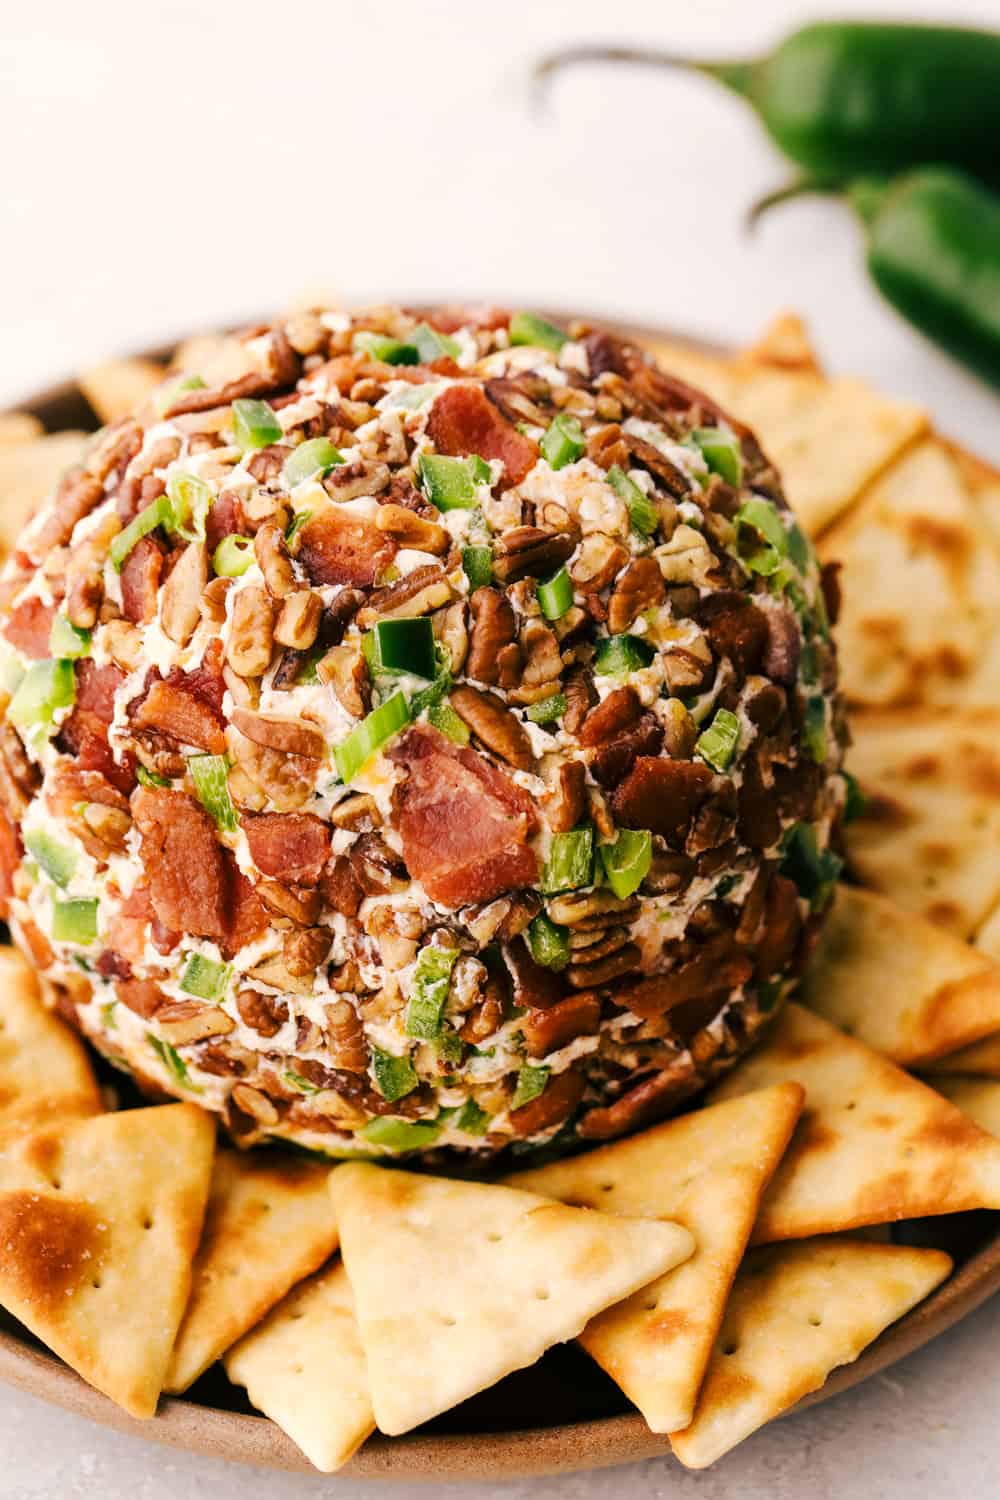 Bacon infused jalapeno cheese ball plated with crackers.